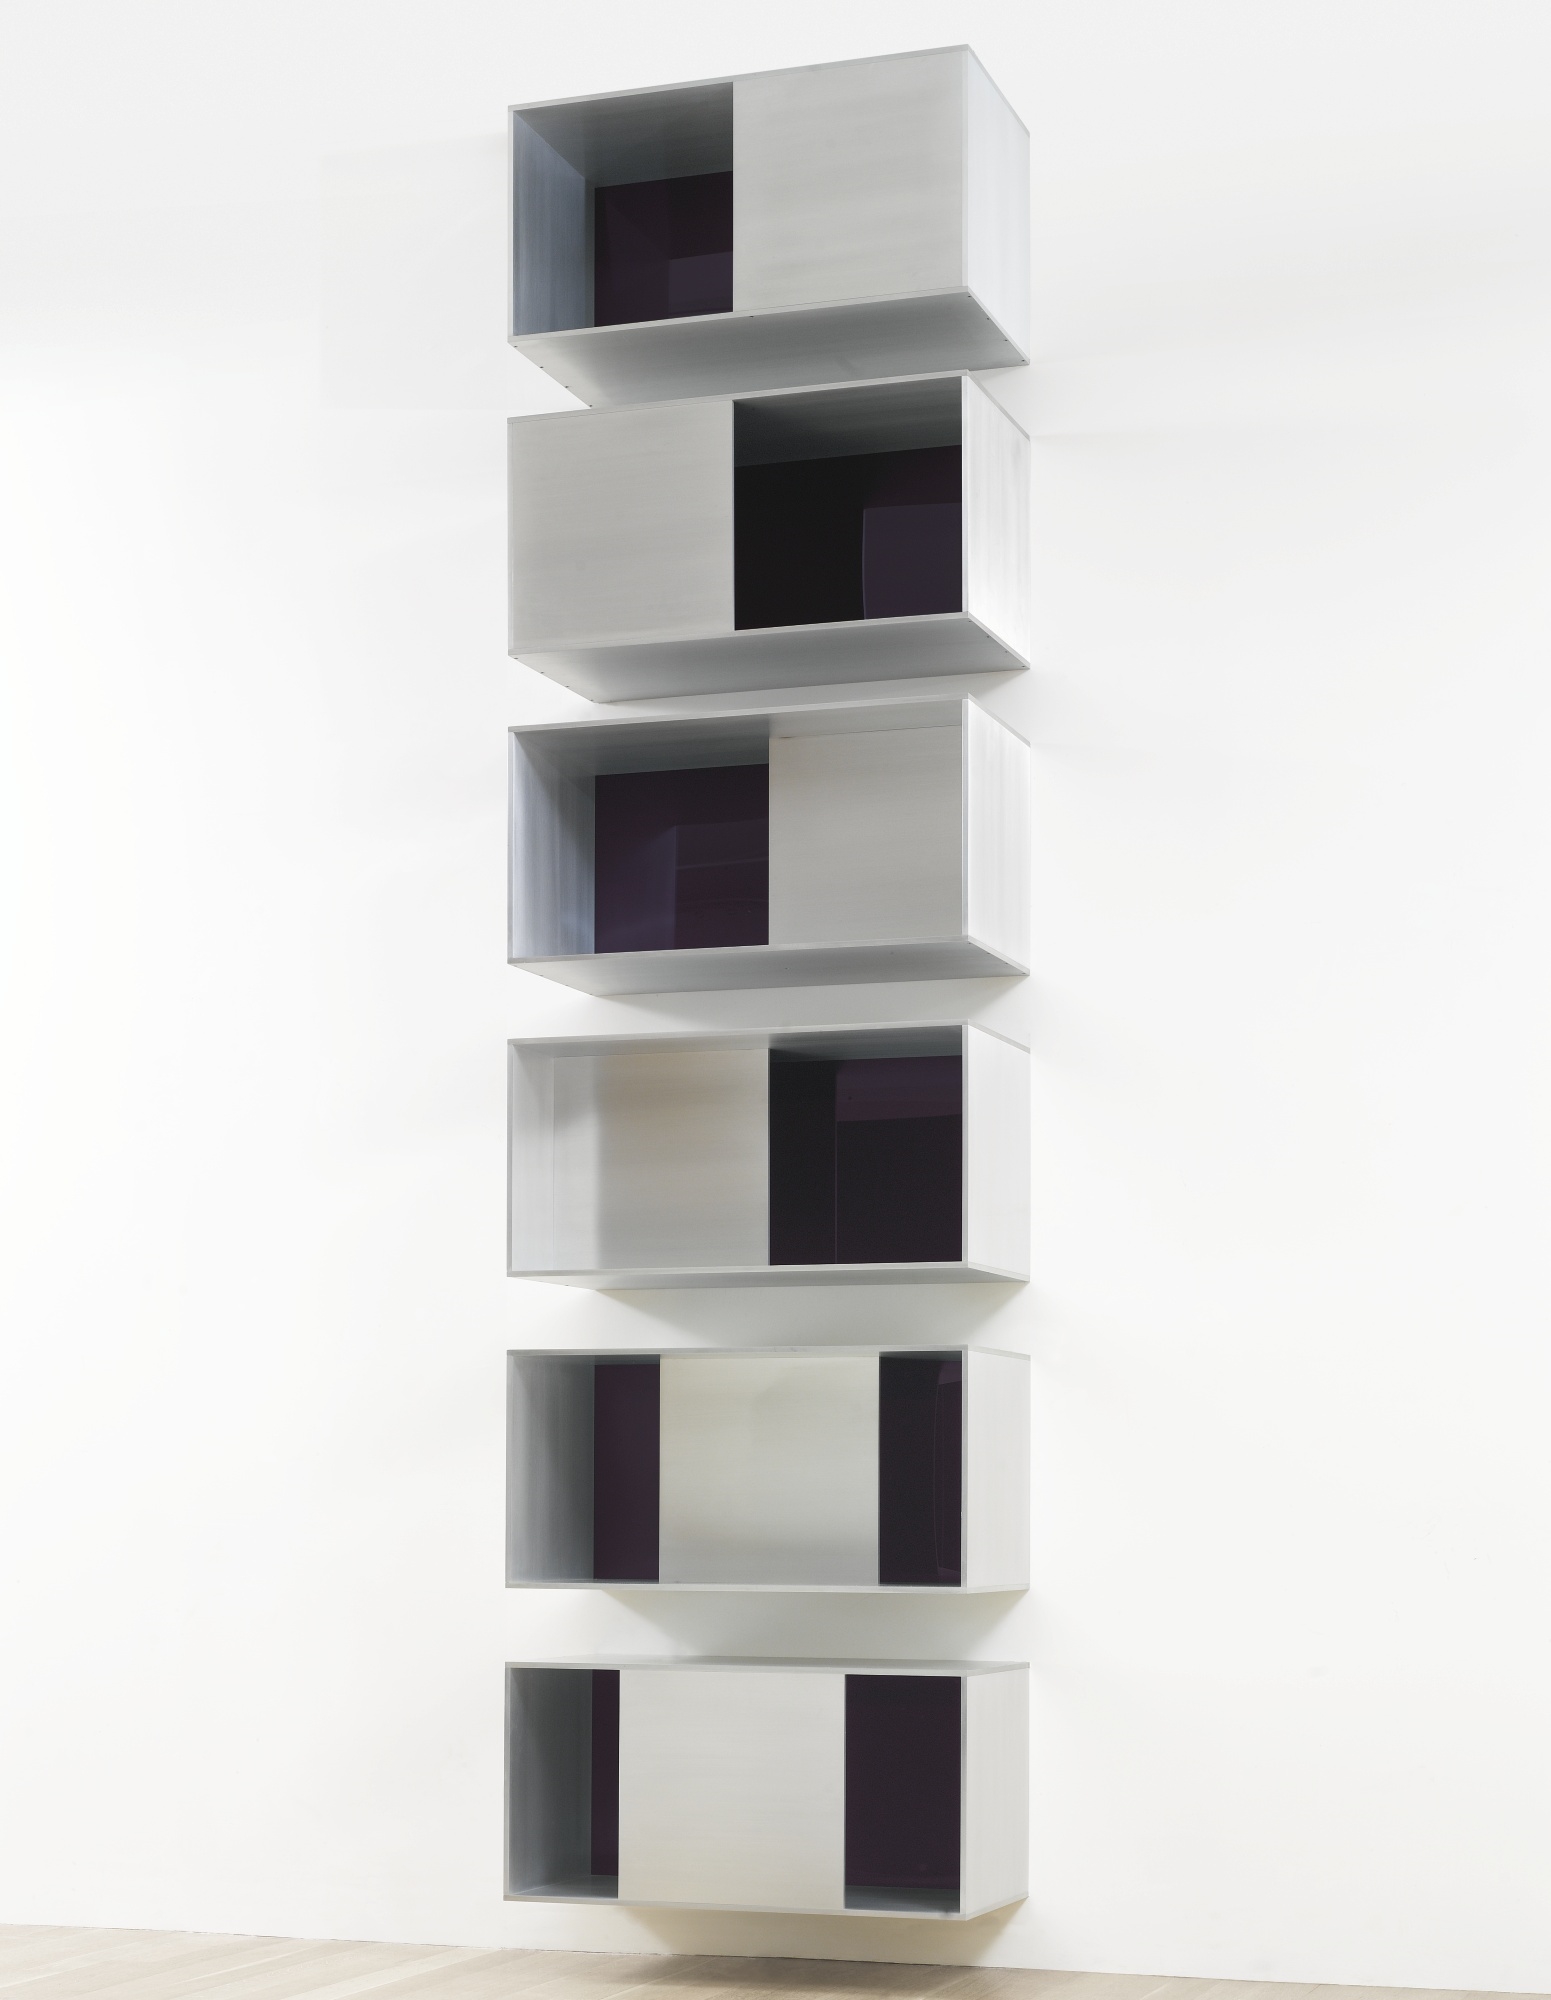 UNTITLED by Donald Judd, 1986